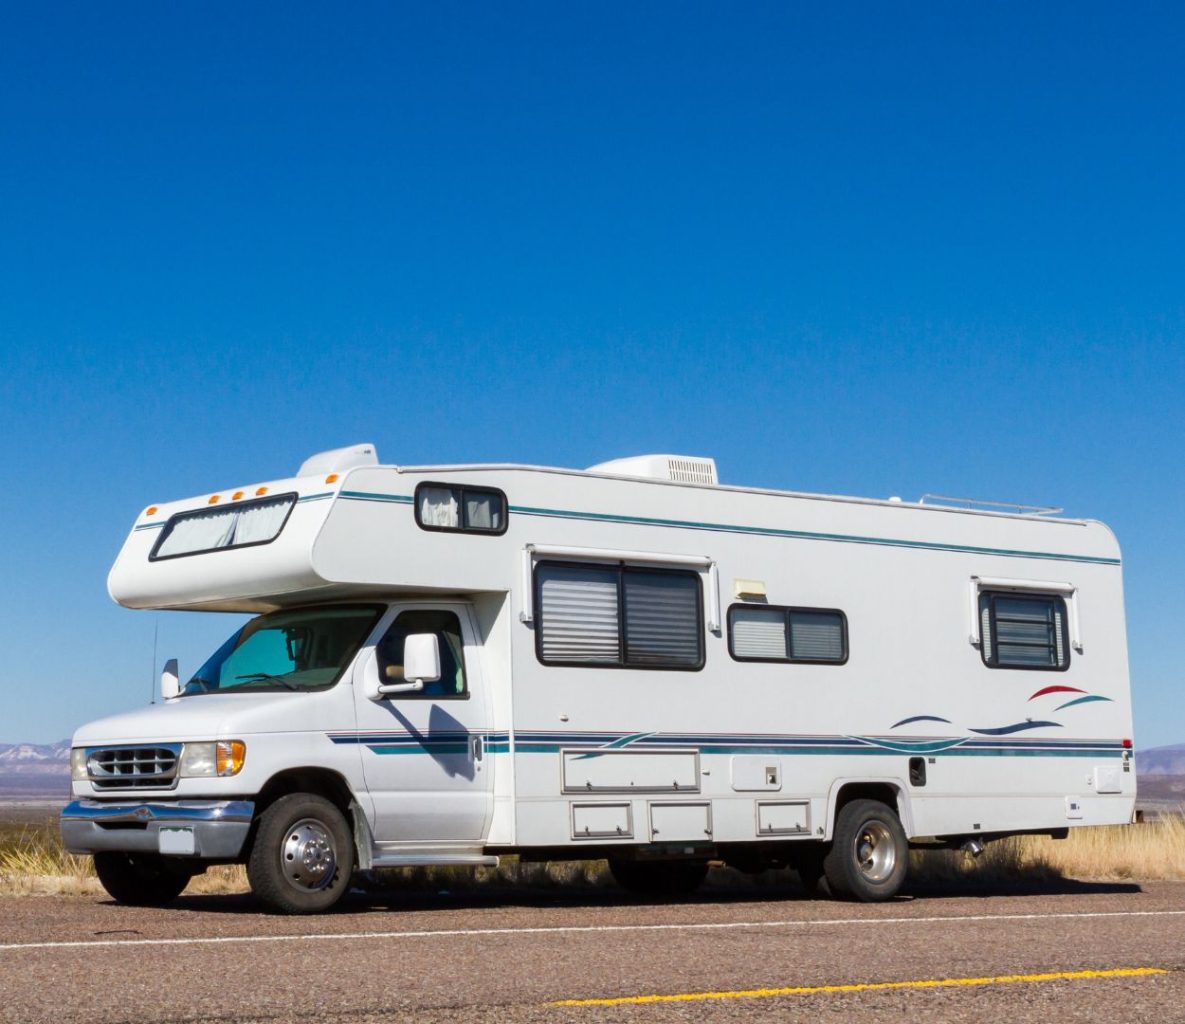 Common Mistakes Every RV Owner Should Avoid